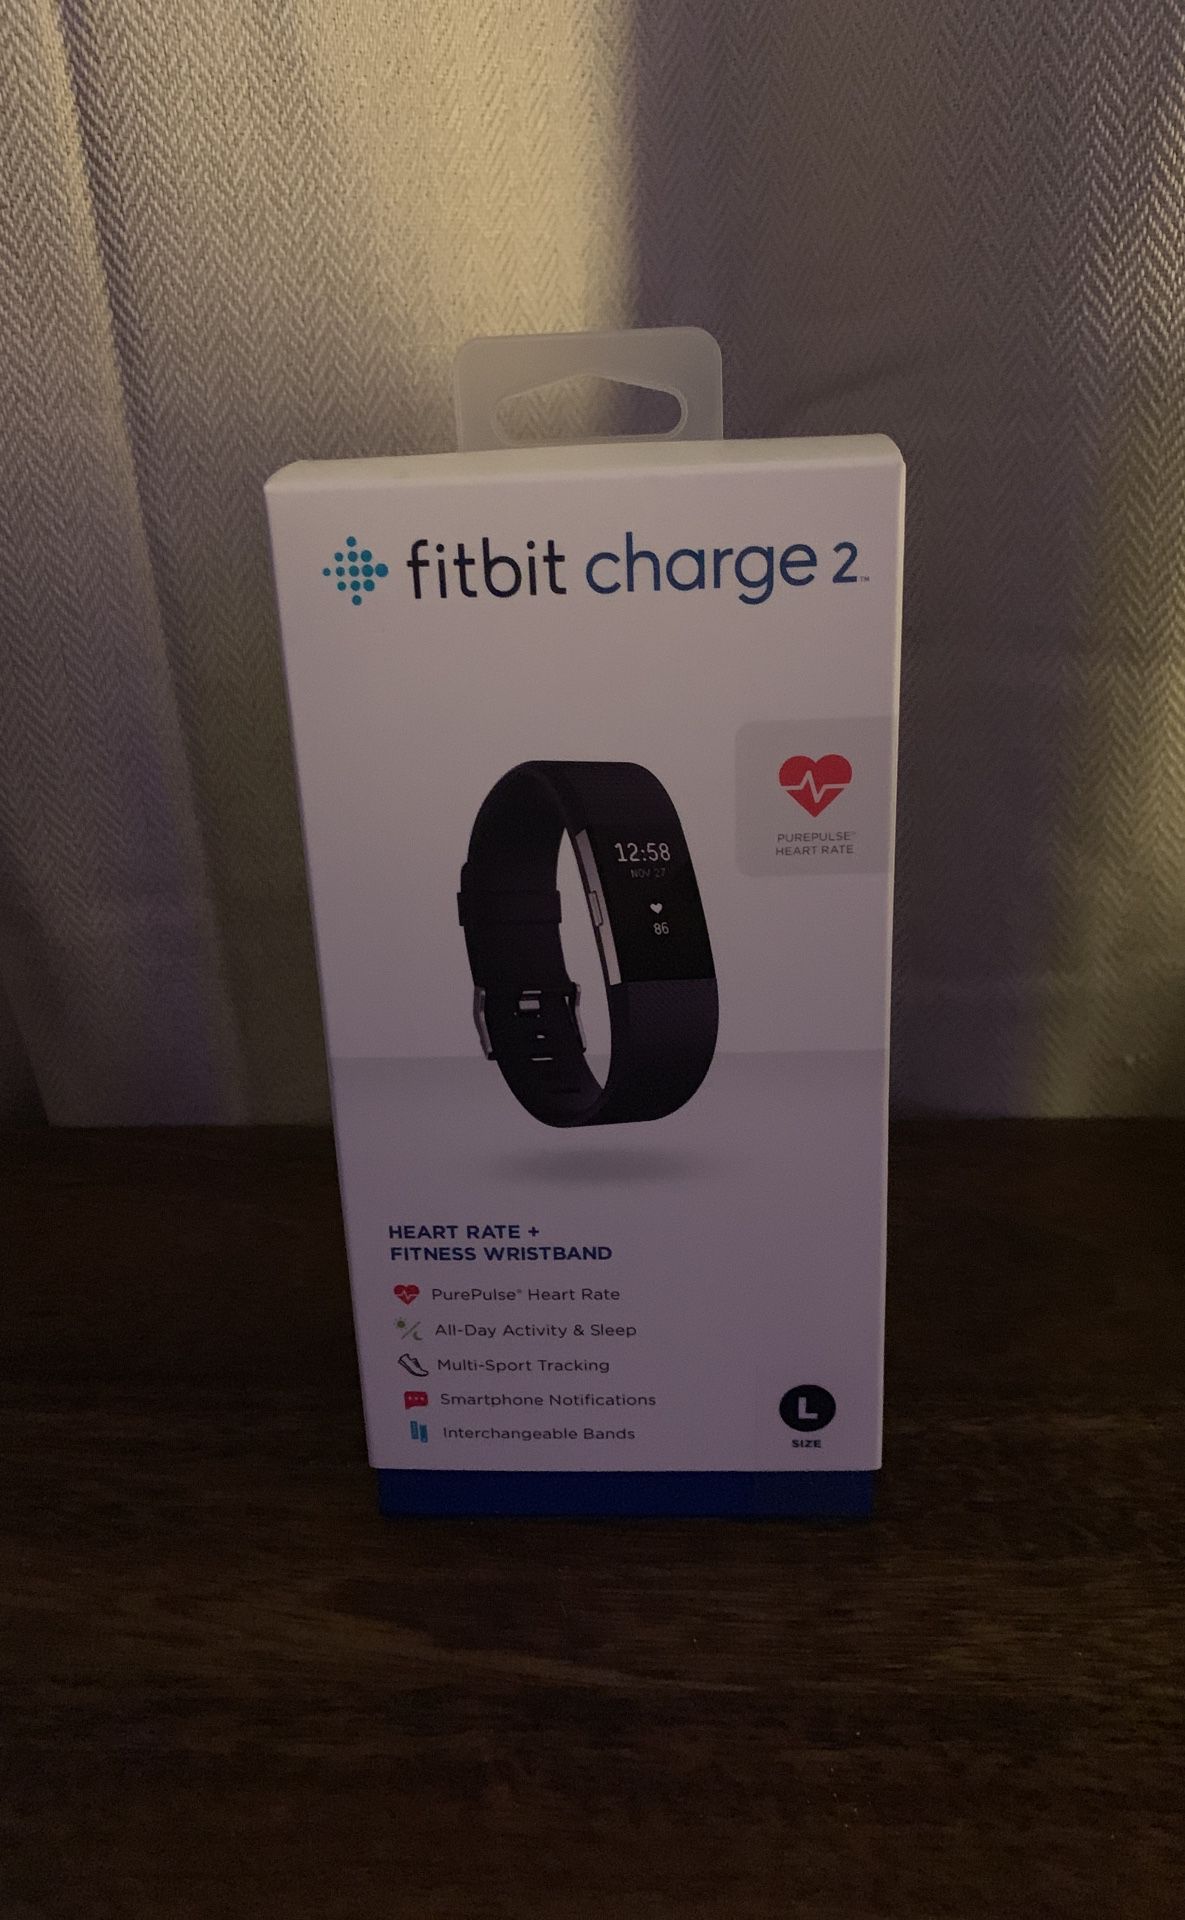 Fitbit Charge 2 Large Black